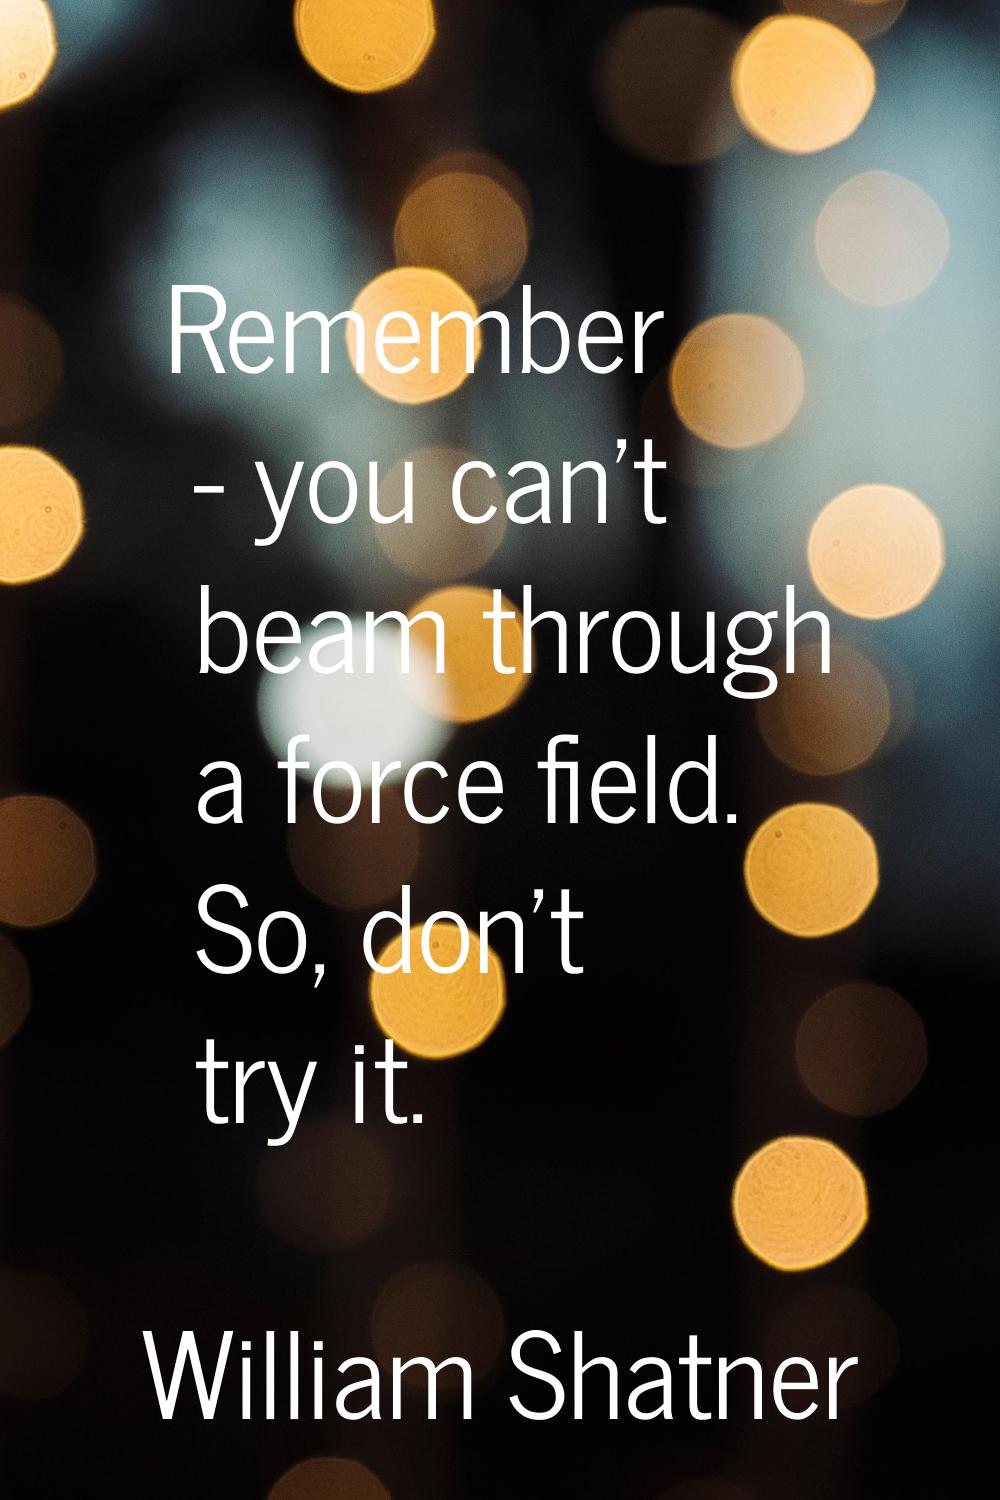 Remember - you can't beam through a force field. So, don't try it.